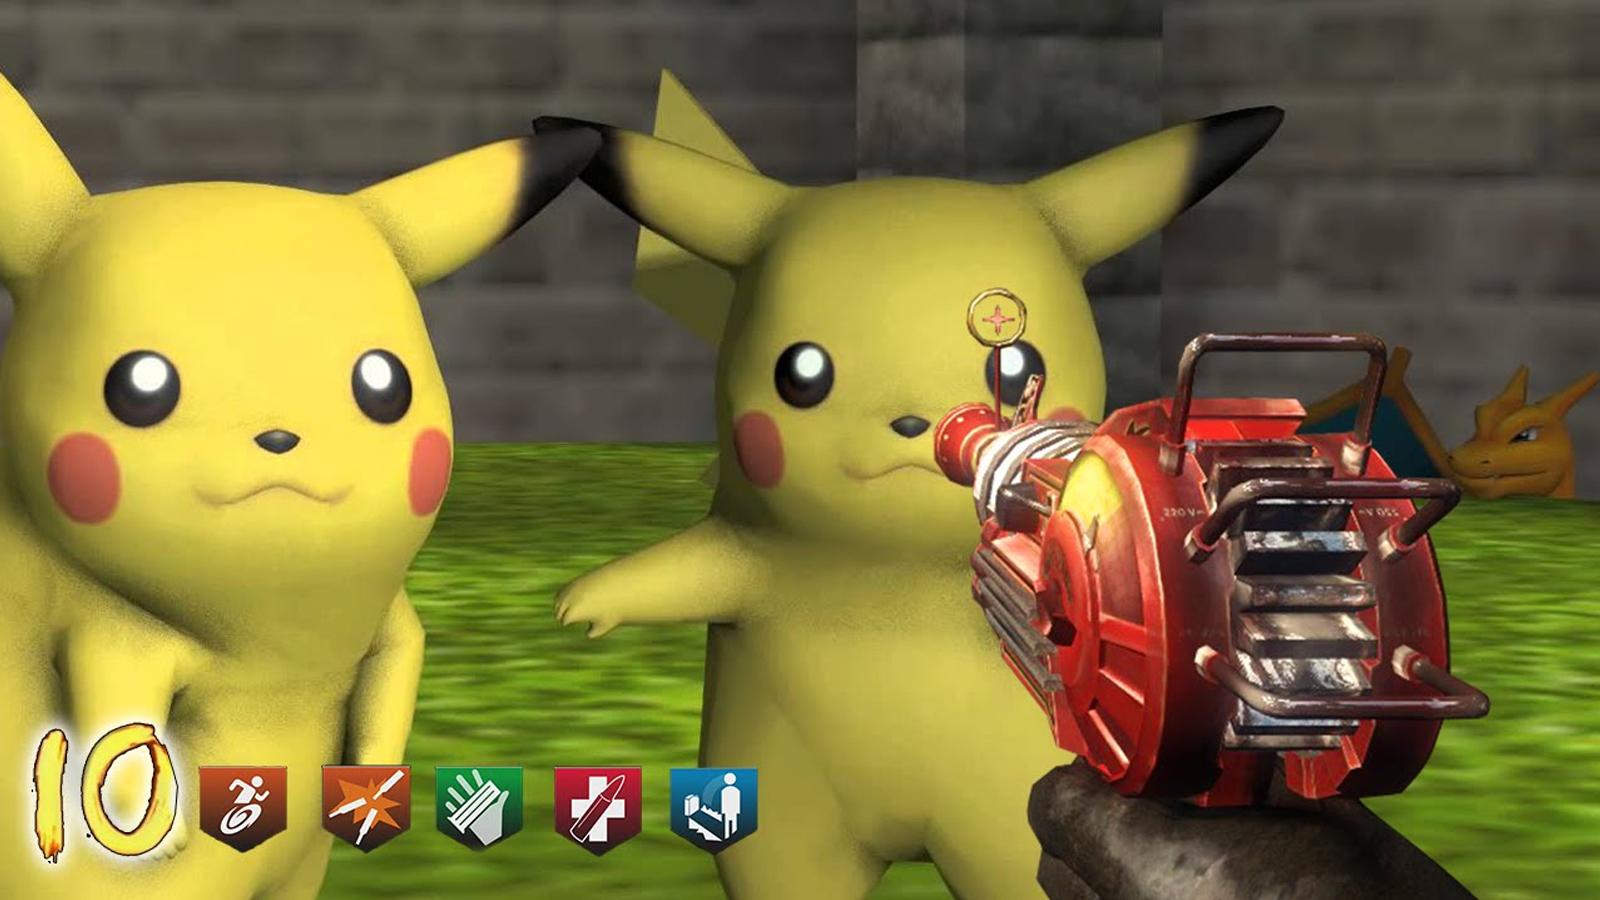 An image of the Pokemon mod for Call of Duty zombies